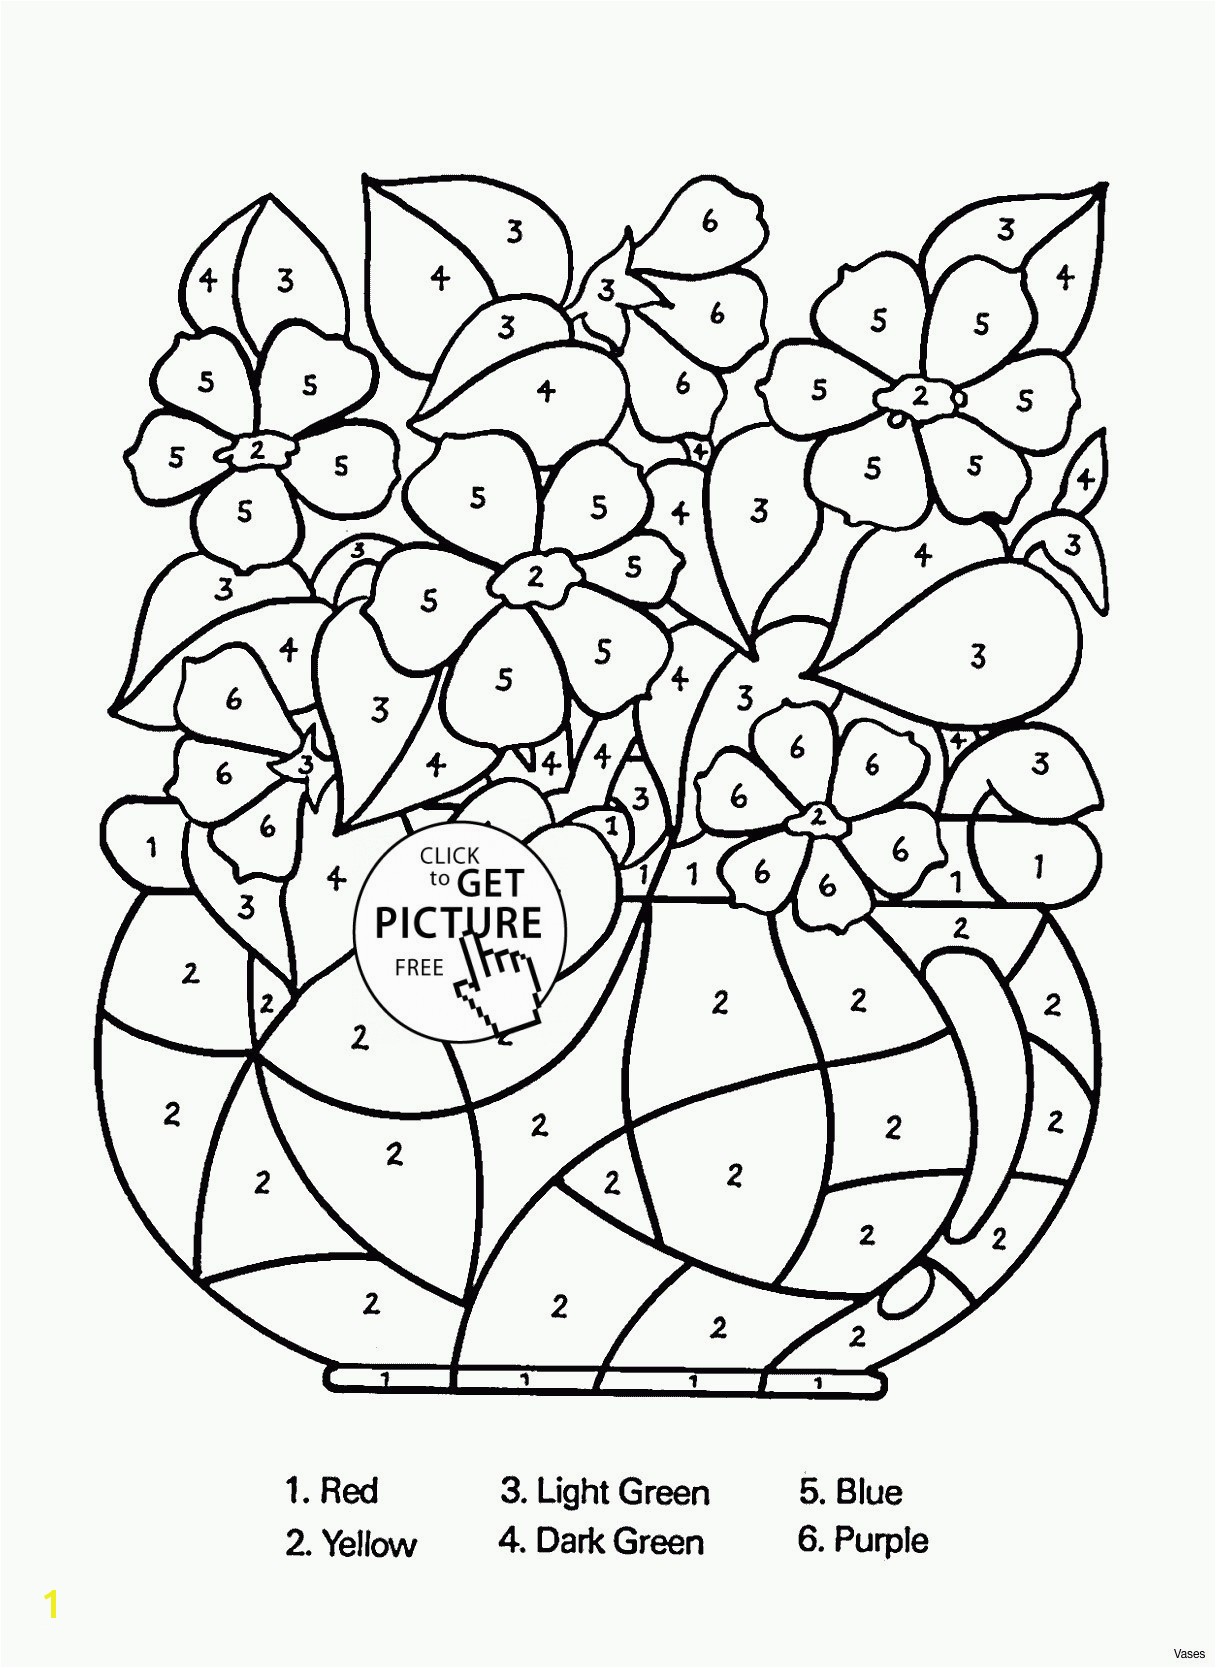 Free Downloadable Coloring Pages From Disney Awesome Free Downloadable Coloring Pages From Disney